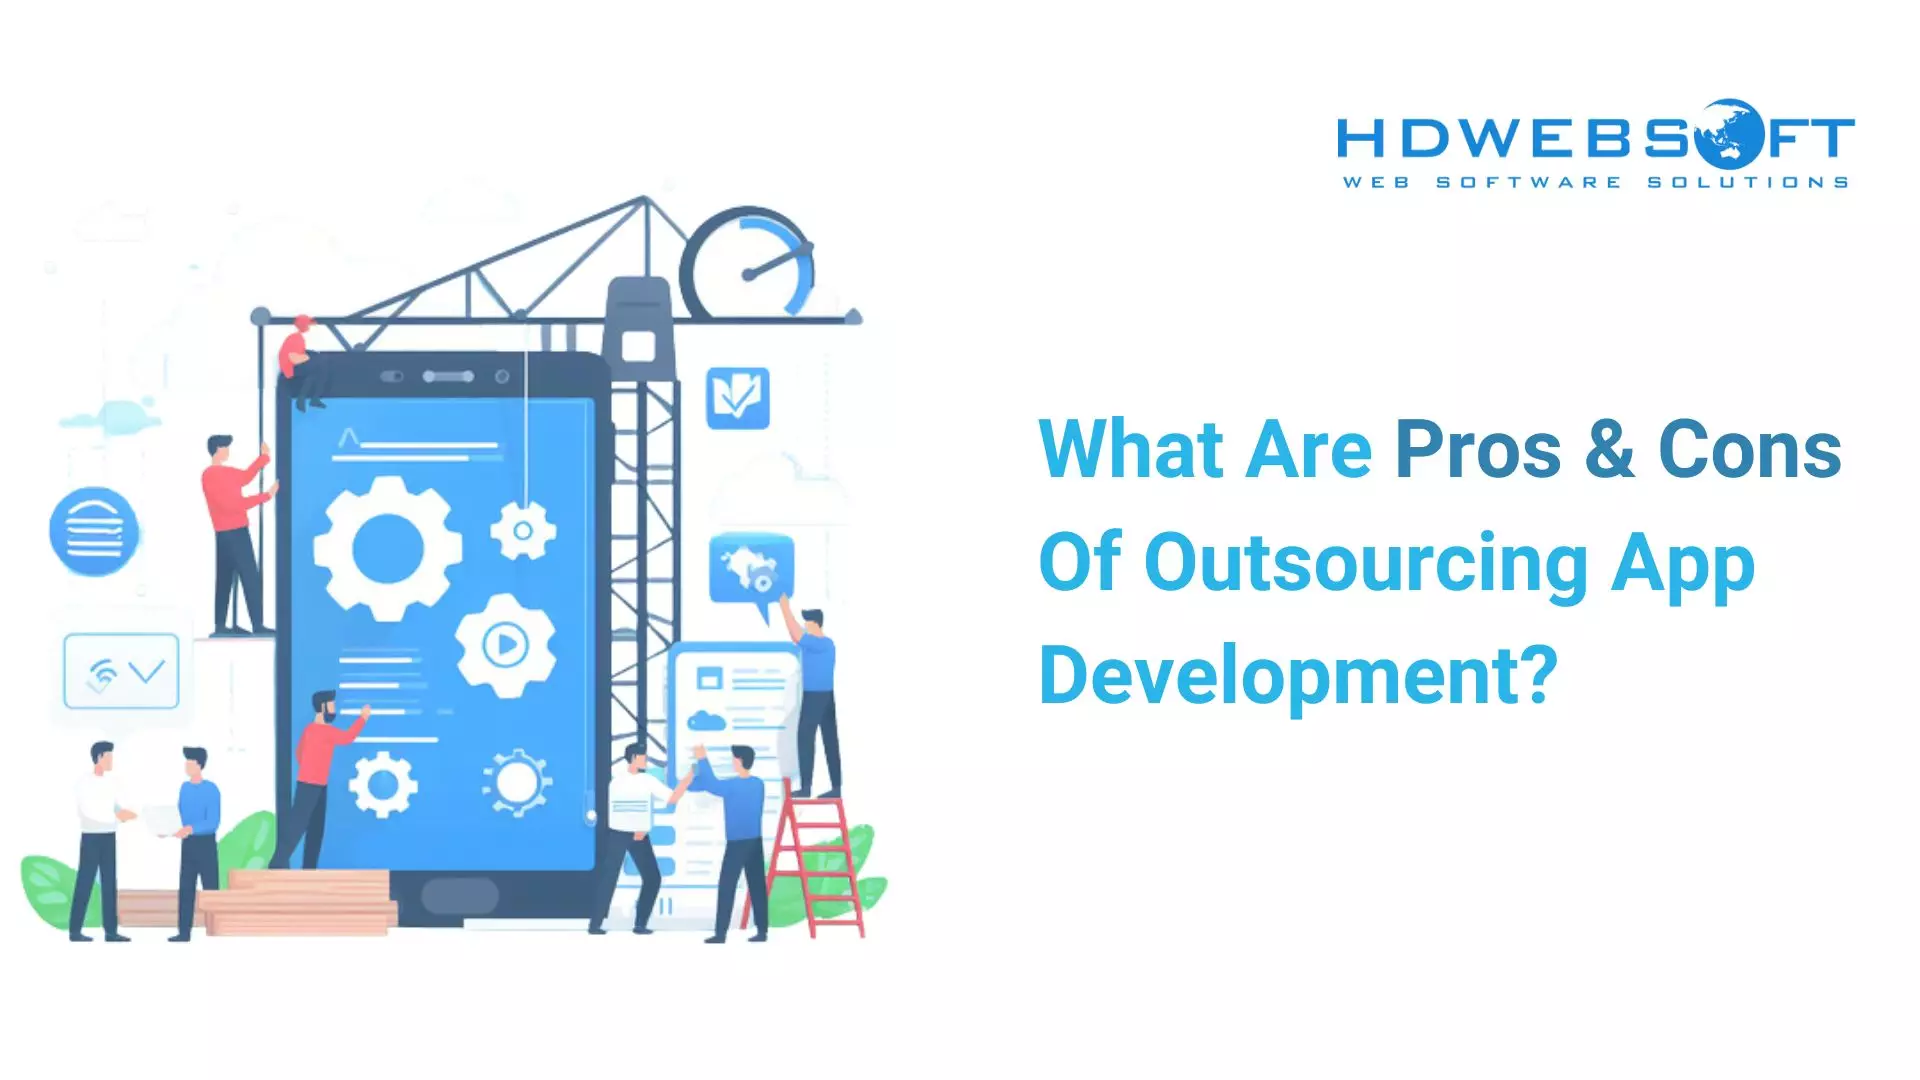 Outsourcing App Development Pros and Cons